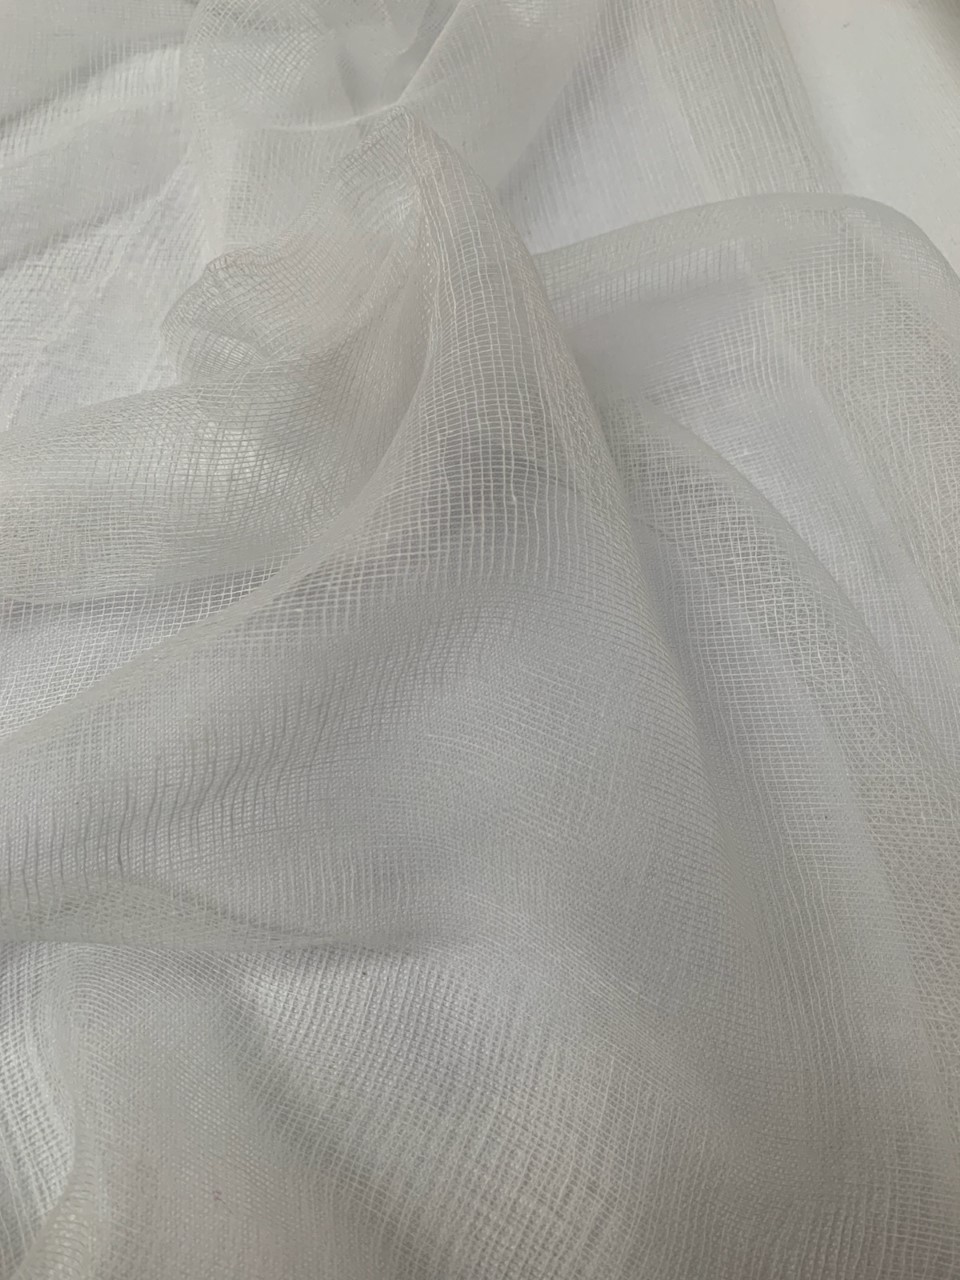 30" Grade 10 White Cheesecloth 1000 Yard Roll